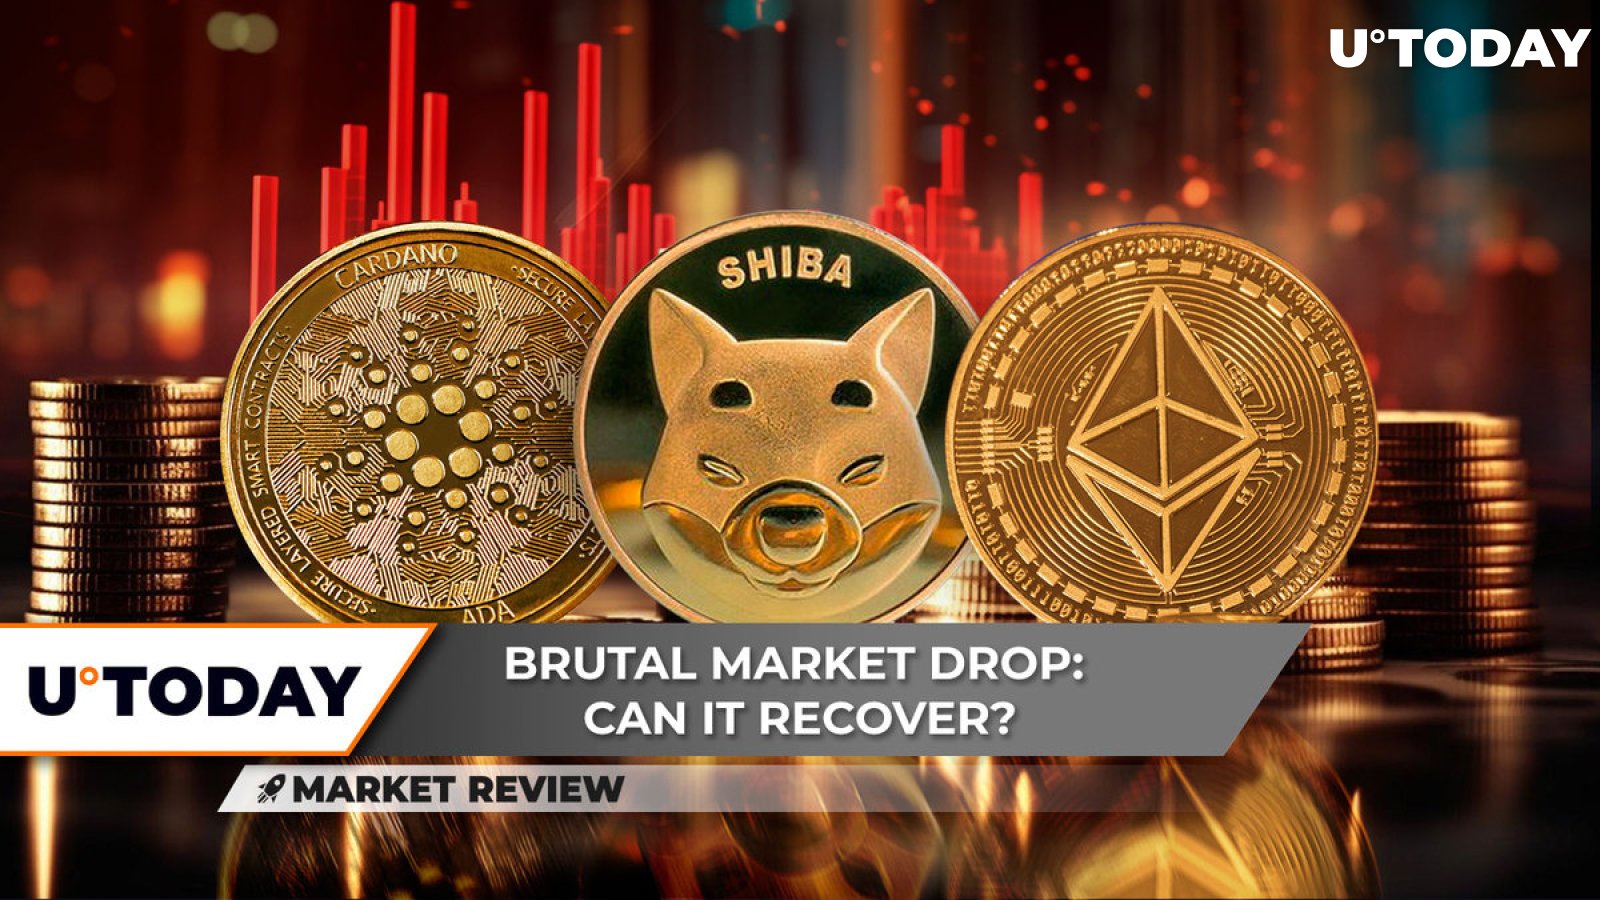 Ethereum (ETH) Secures $3,000, Cardano's (ADA) Dramatic Drop Irrelevant, Will Shiba Inu (SHIB) Recover After 30% Plunge?